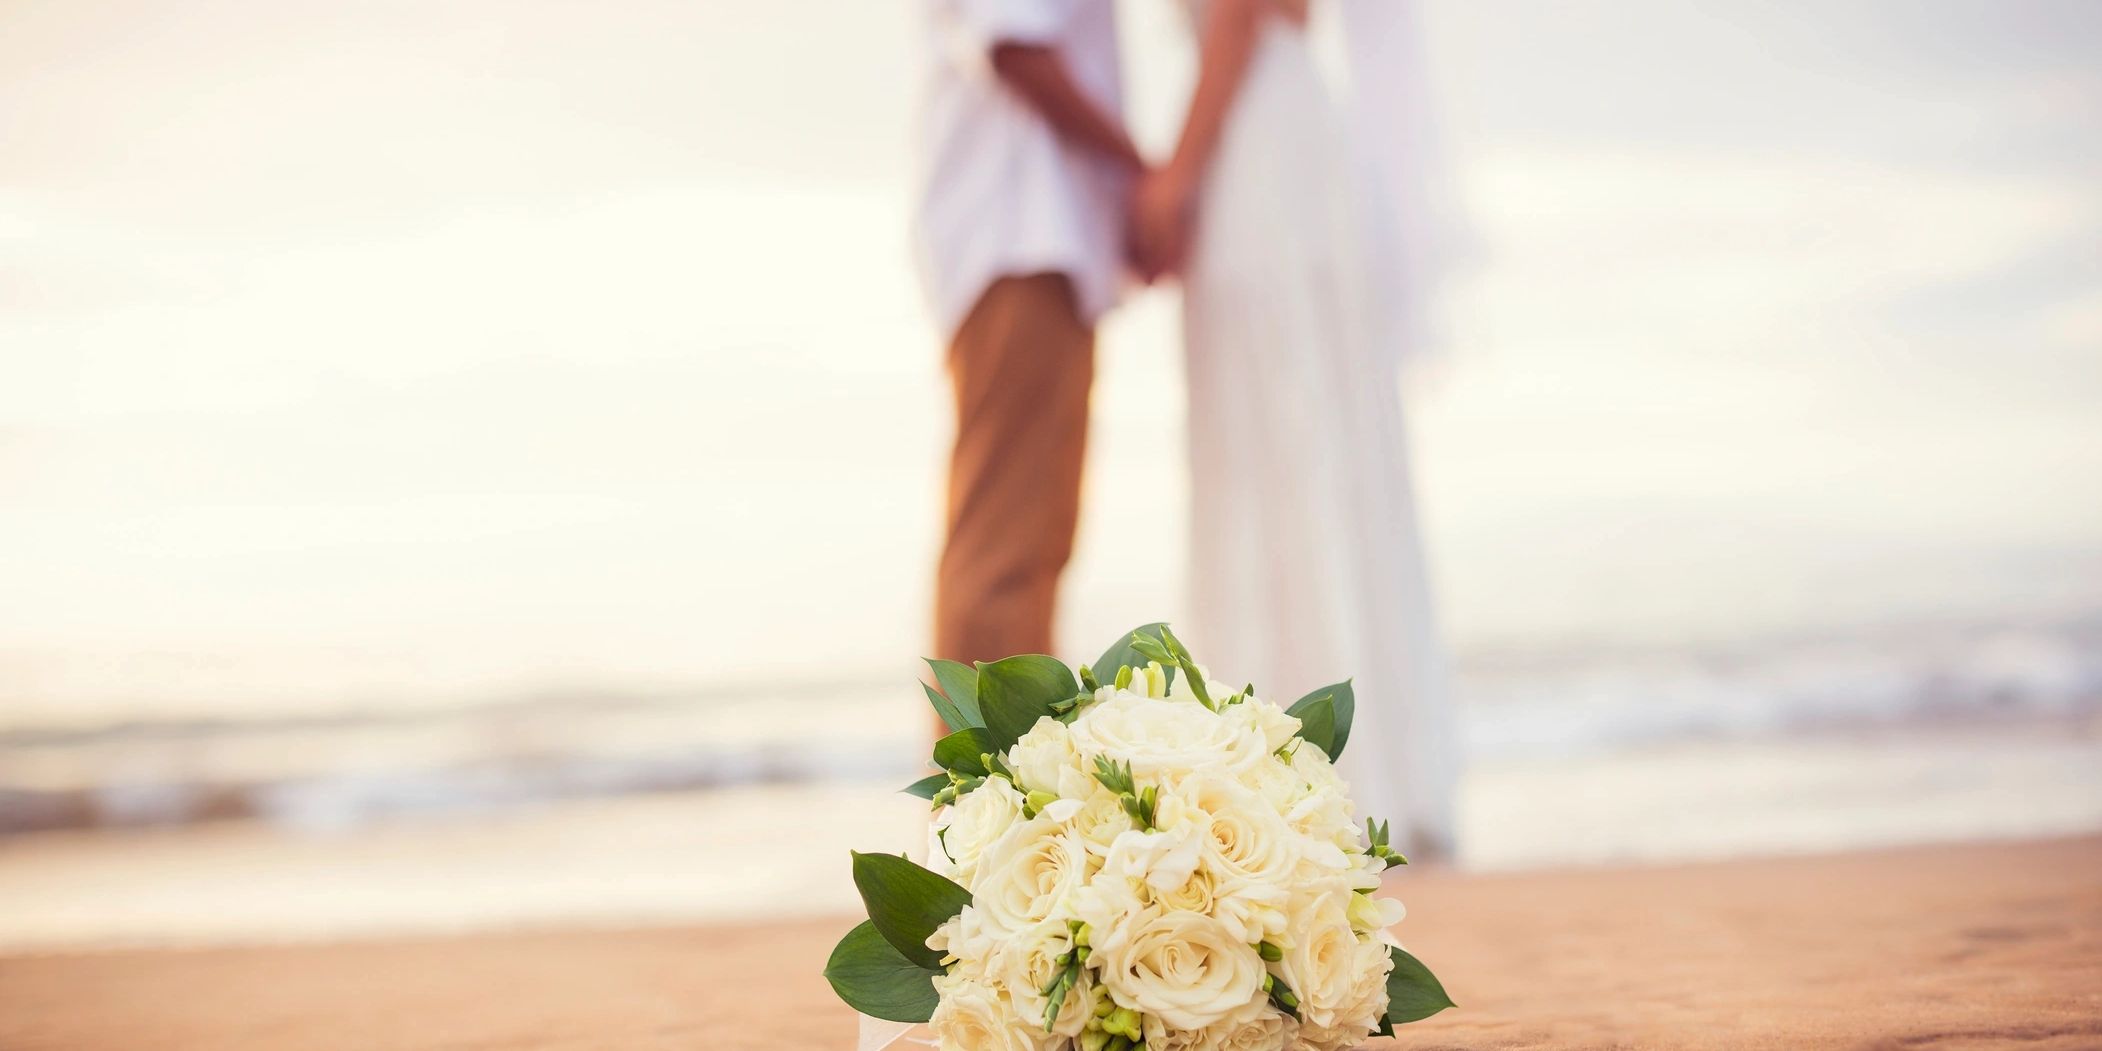 Romance novel happy ending of couple getting married on the beach.